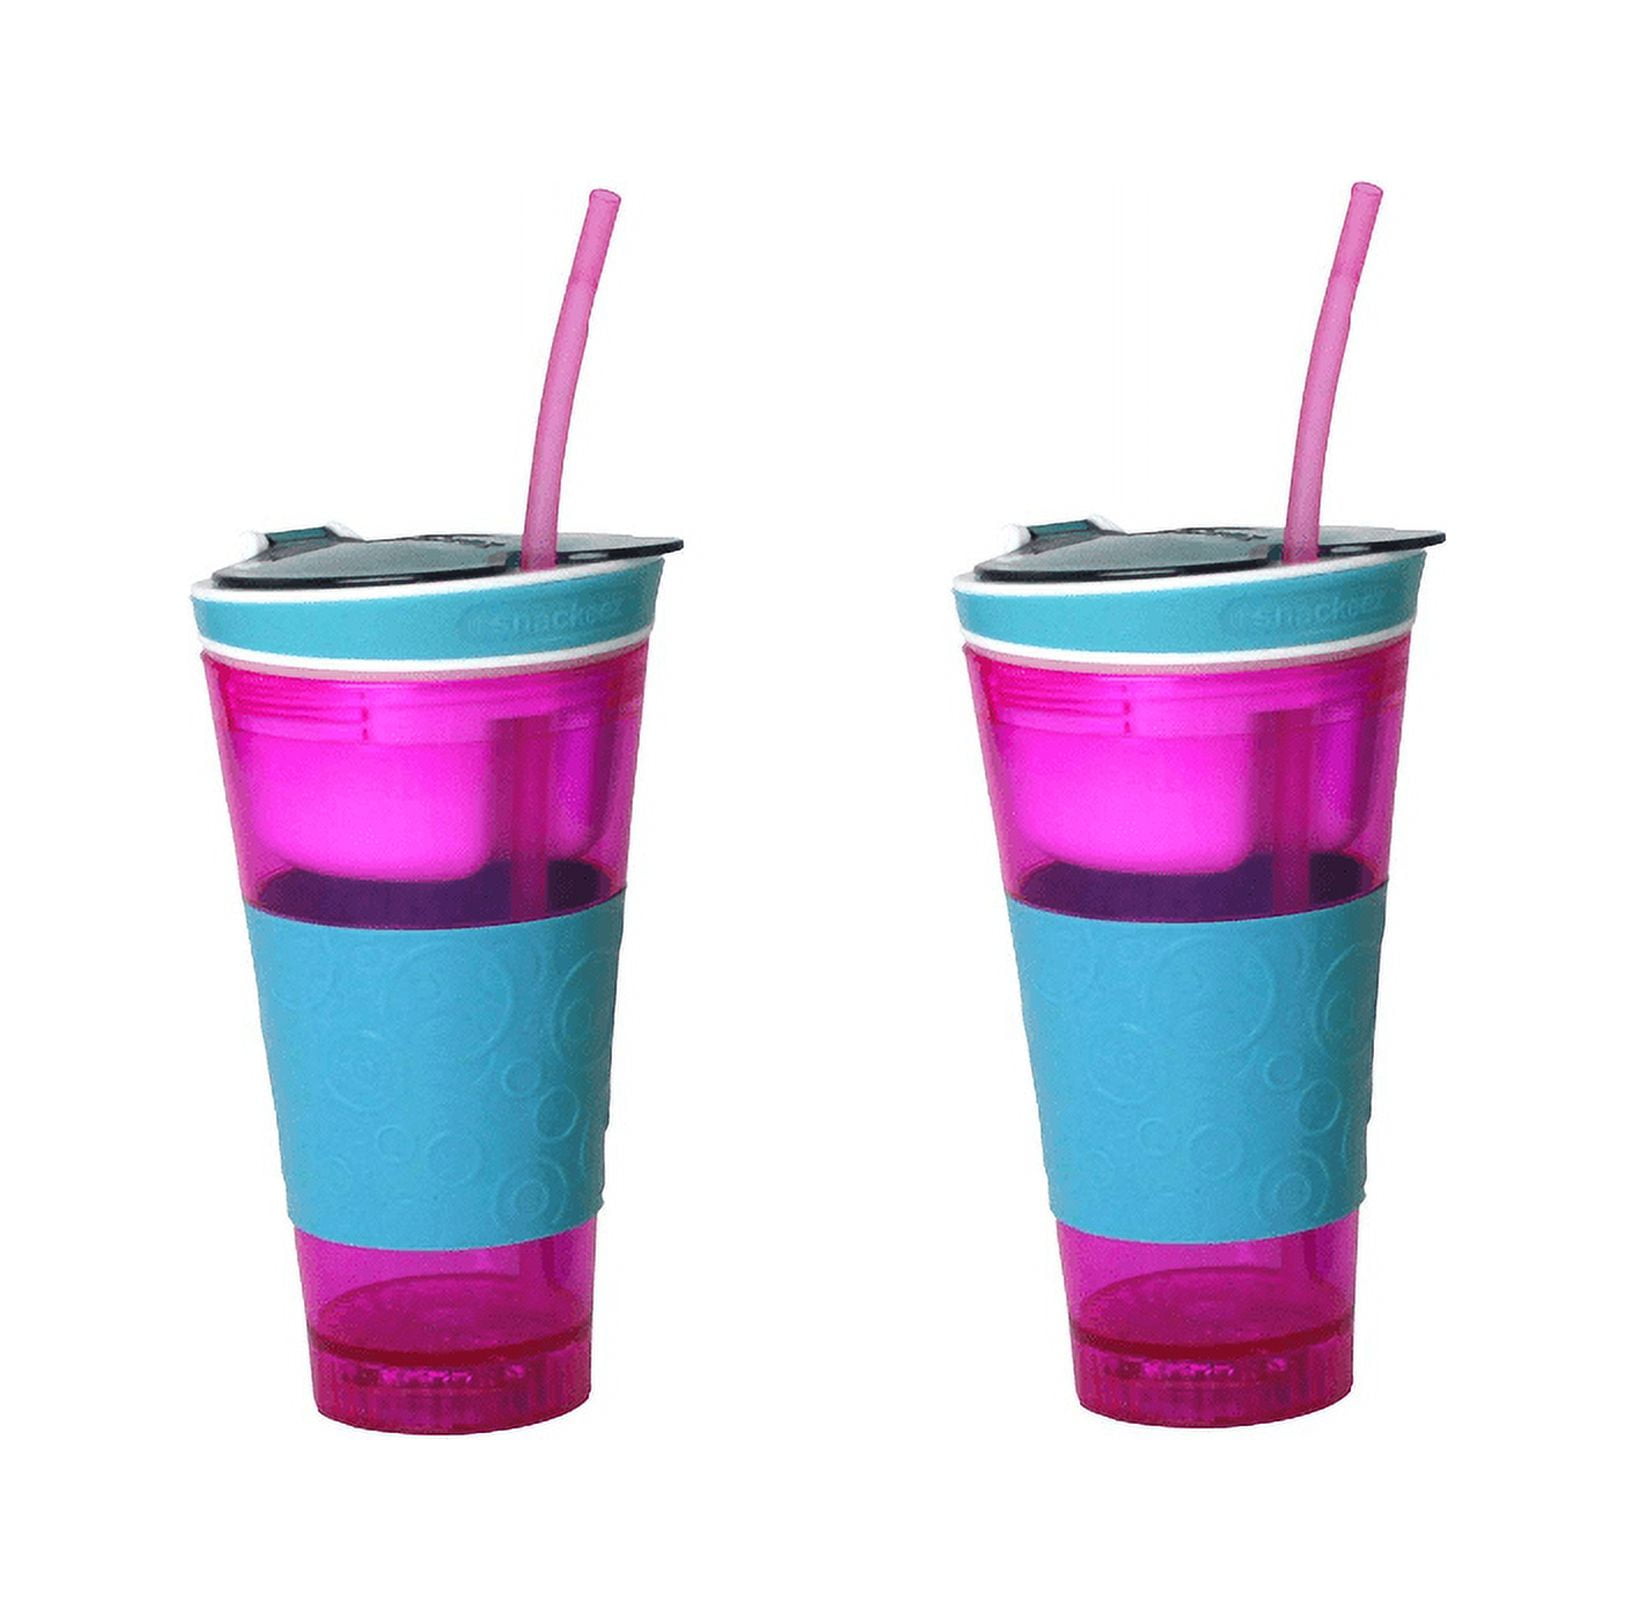 Snackeez Plastic 2 in 1 Snack & Drink Cup - 2 pack (Pink/Blue)